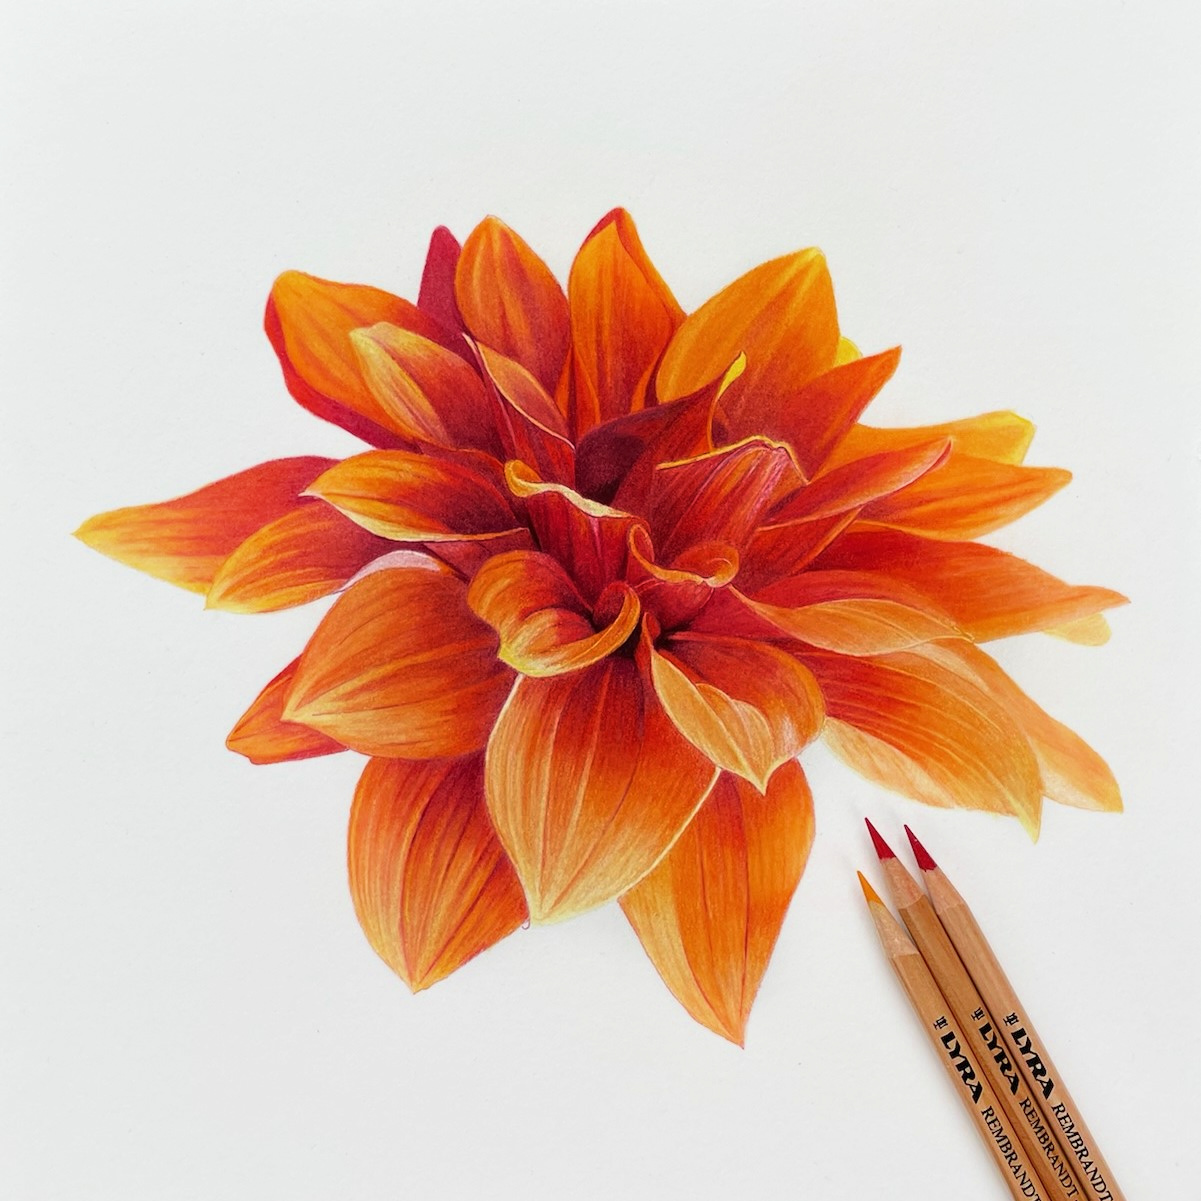 45 Beautiful Flower Drawings and Realistic Color Pencil Drawings-saigonsouth.com.vn